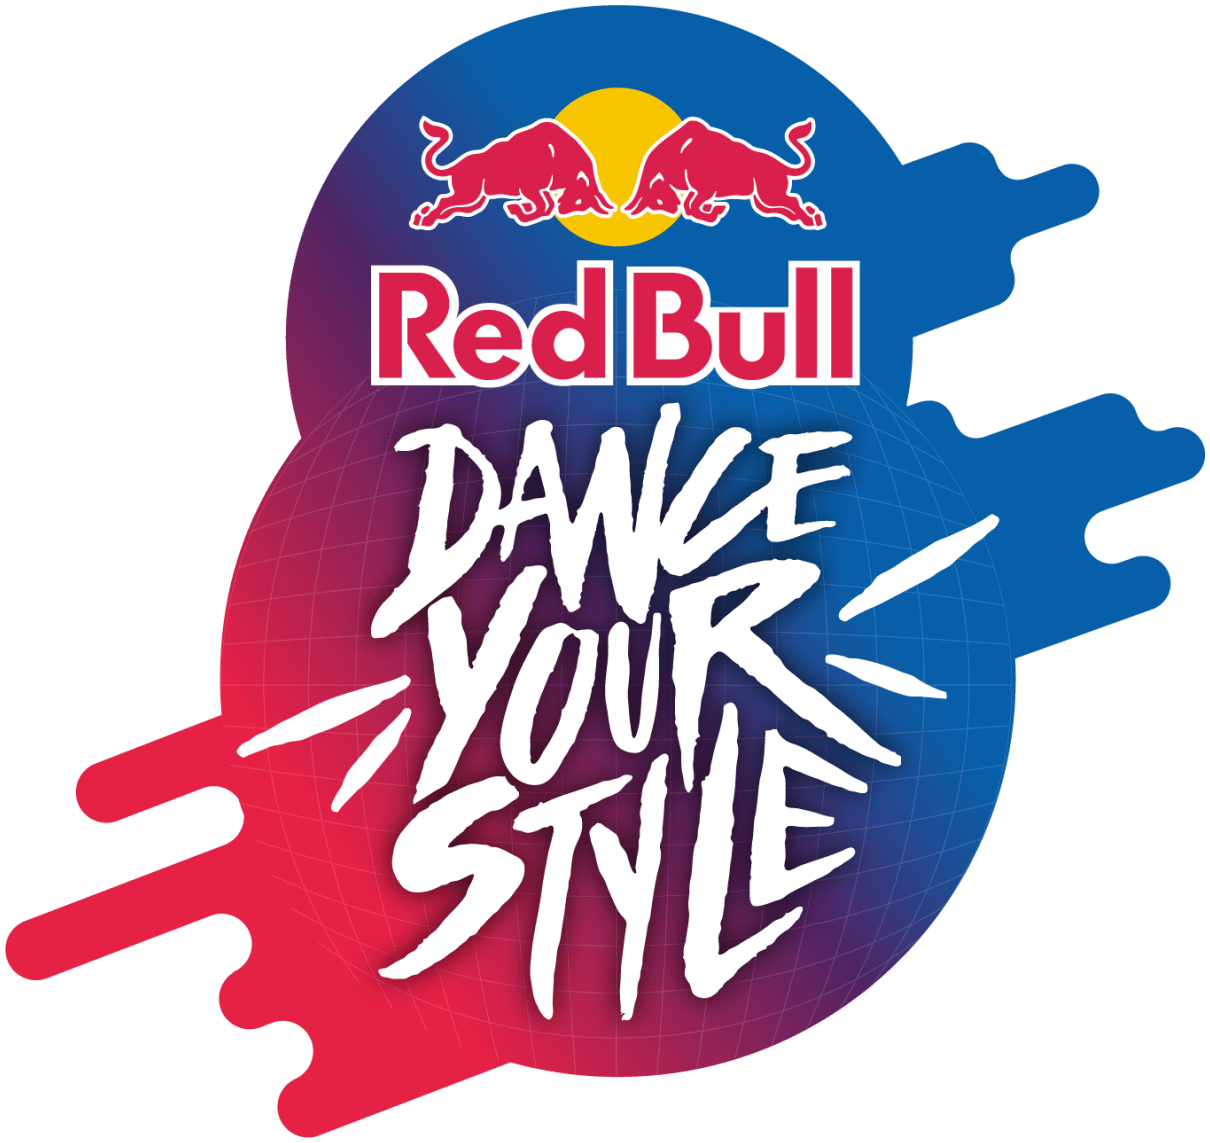 The official logo of Red Bull Dance Your Style